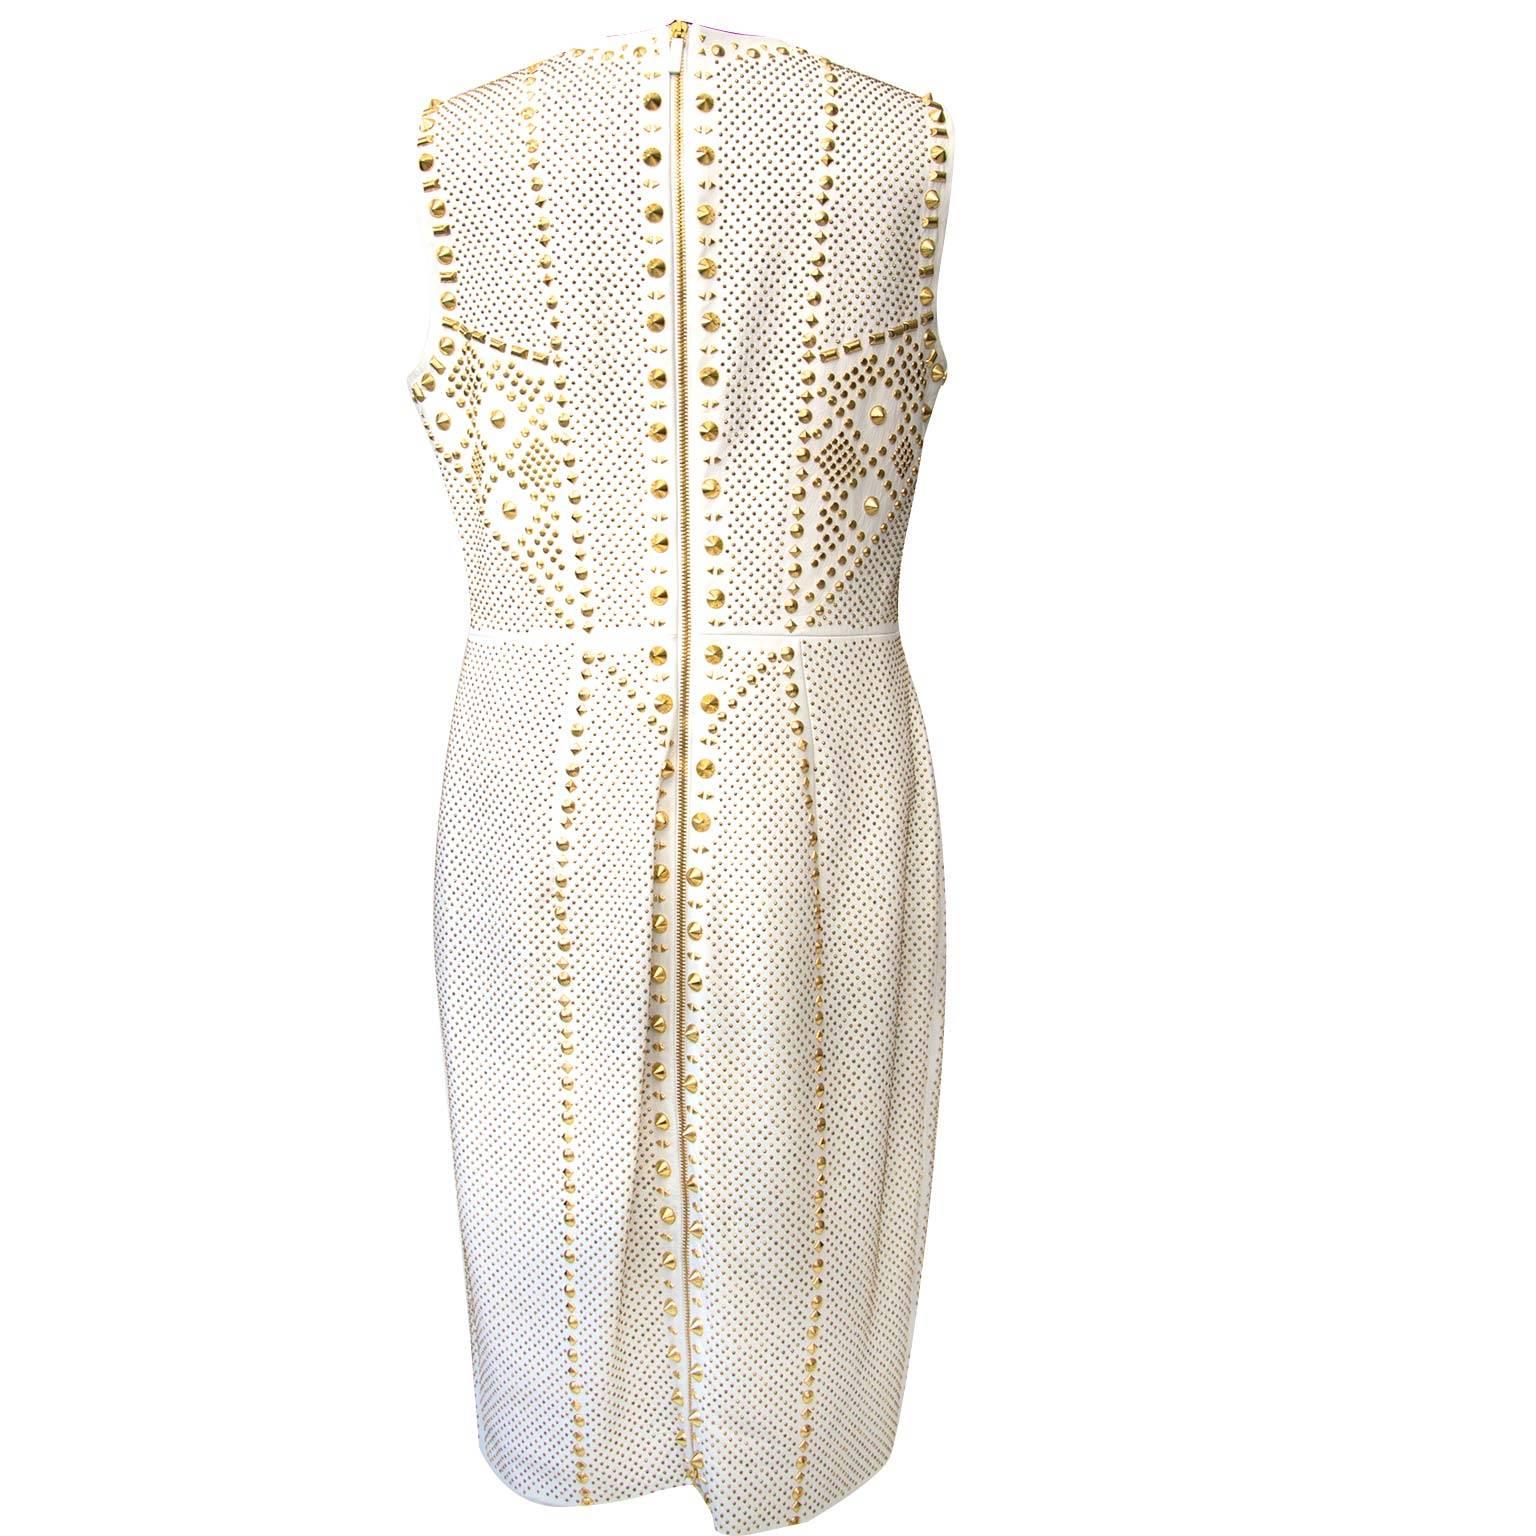 retail price €7500

A real must have this Versace leather dress. 
This eyecatching dress features a studded geometric design that brings optical interest while contouring an hourglass silhouette. 

Very soft white calfskin finished with contrasting